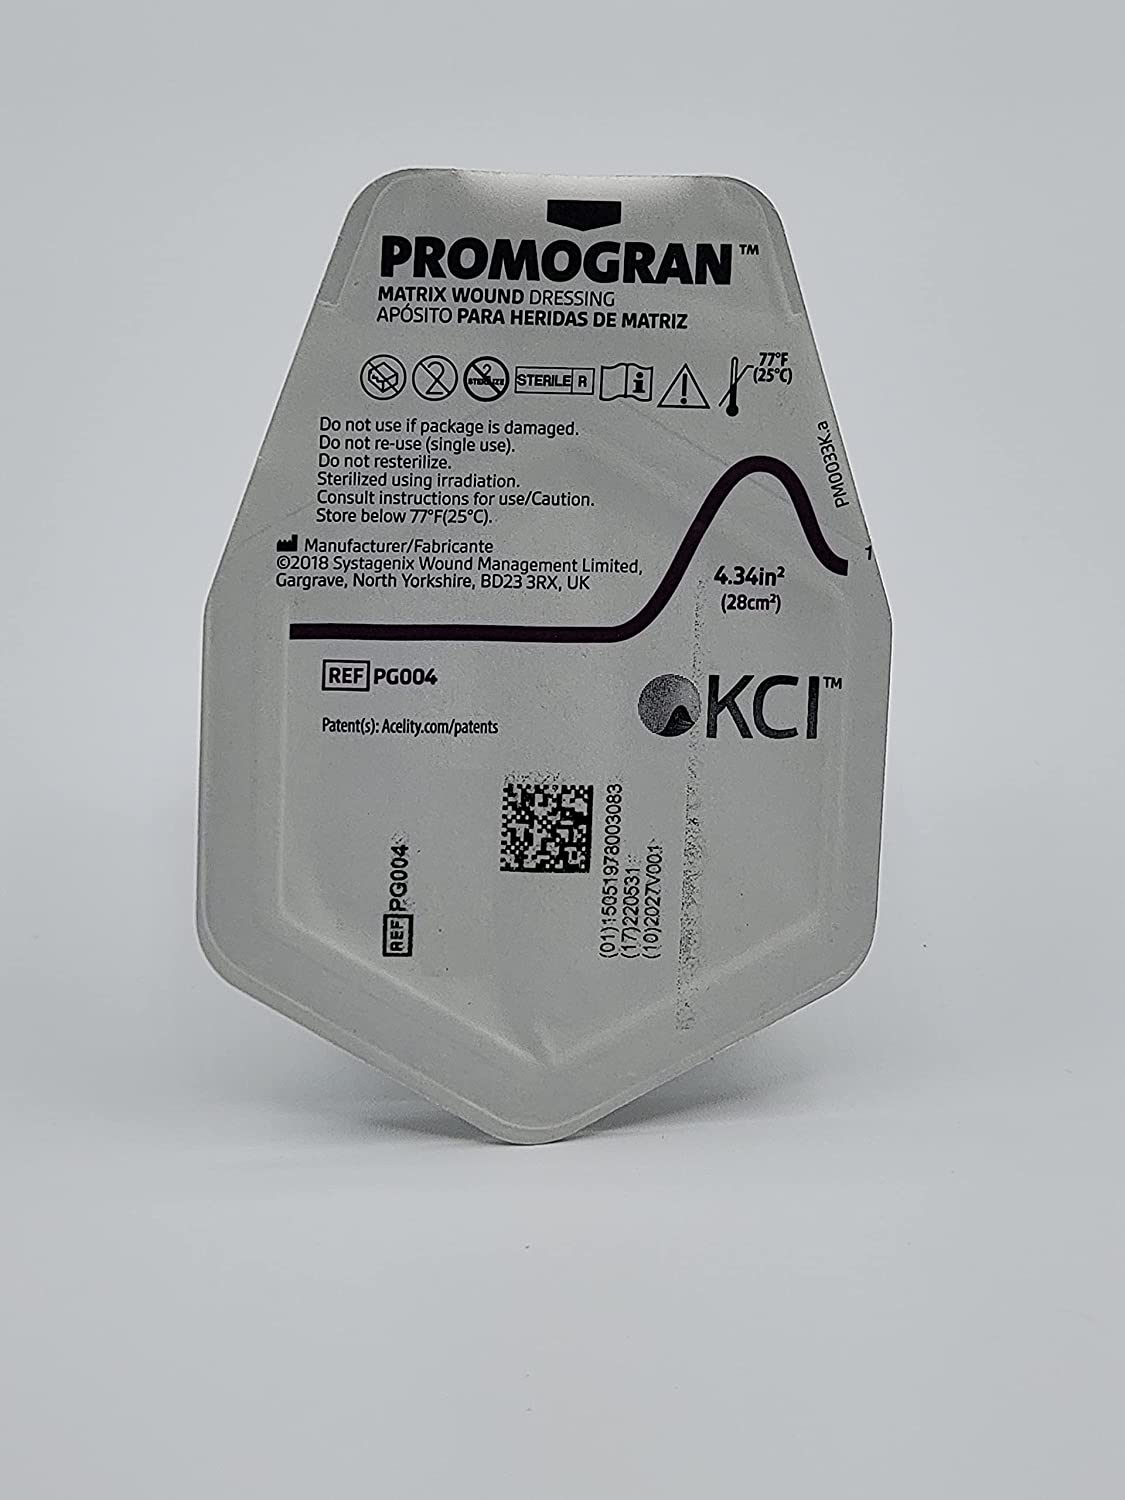 3M Systagenix Promogran Matrix PG004 - Collagen Dressing, Without Border, Collagen / (ORC) Oxidized Regenerated Cellulose, Sterile, White, Hexagon - 4 1/3